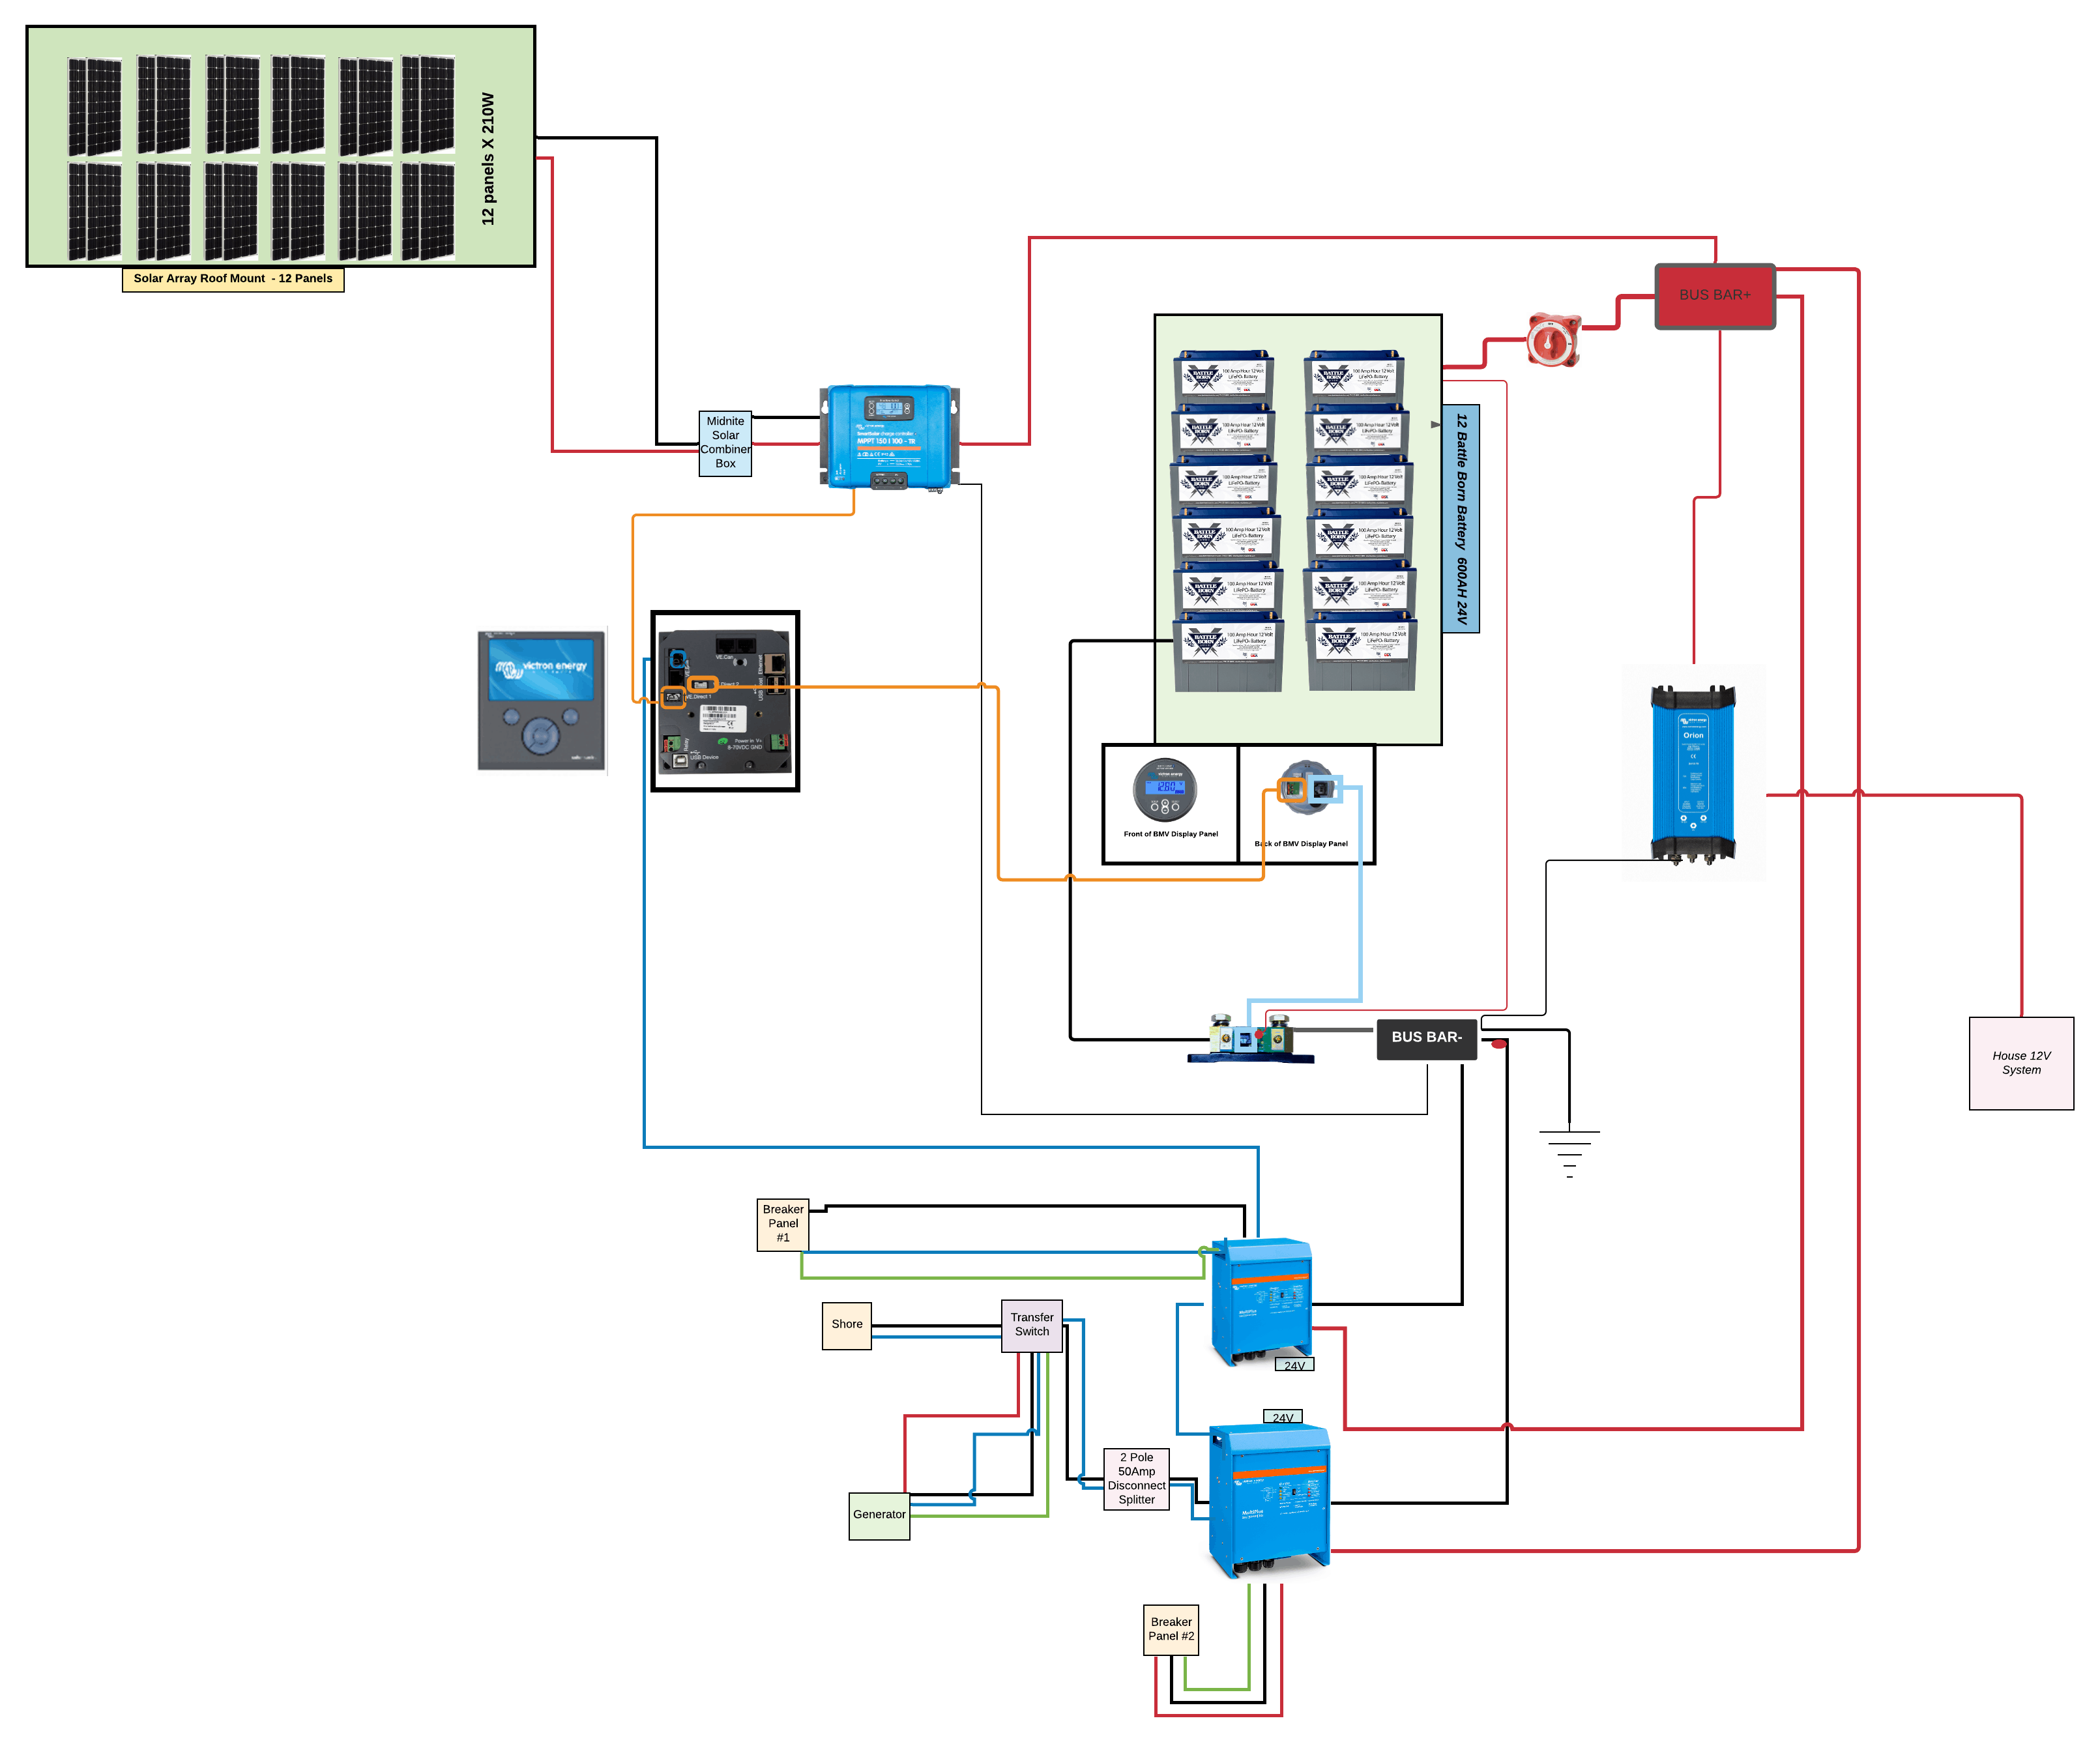 Emory Peterson Schematic